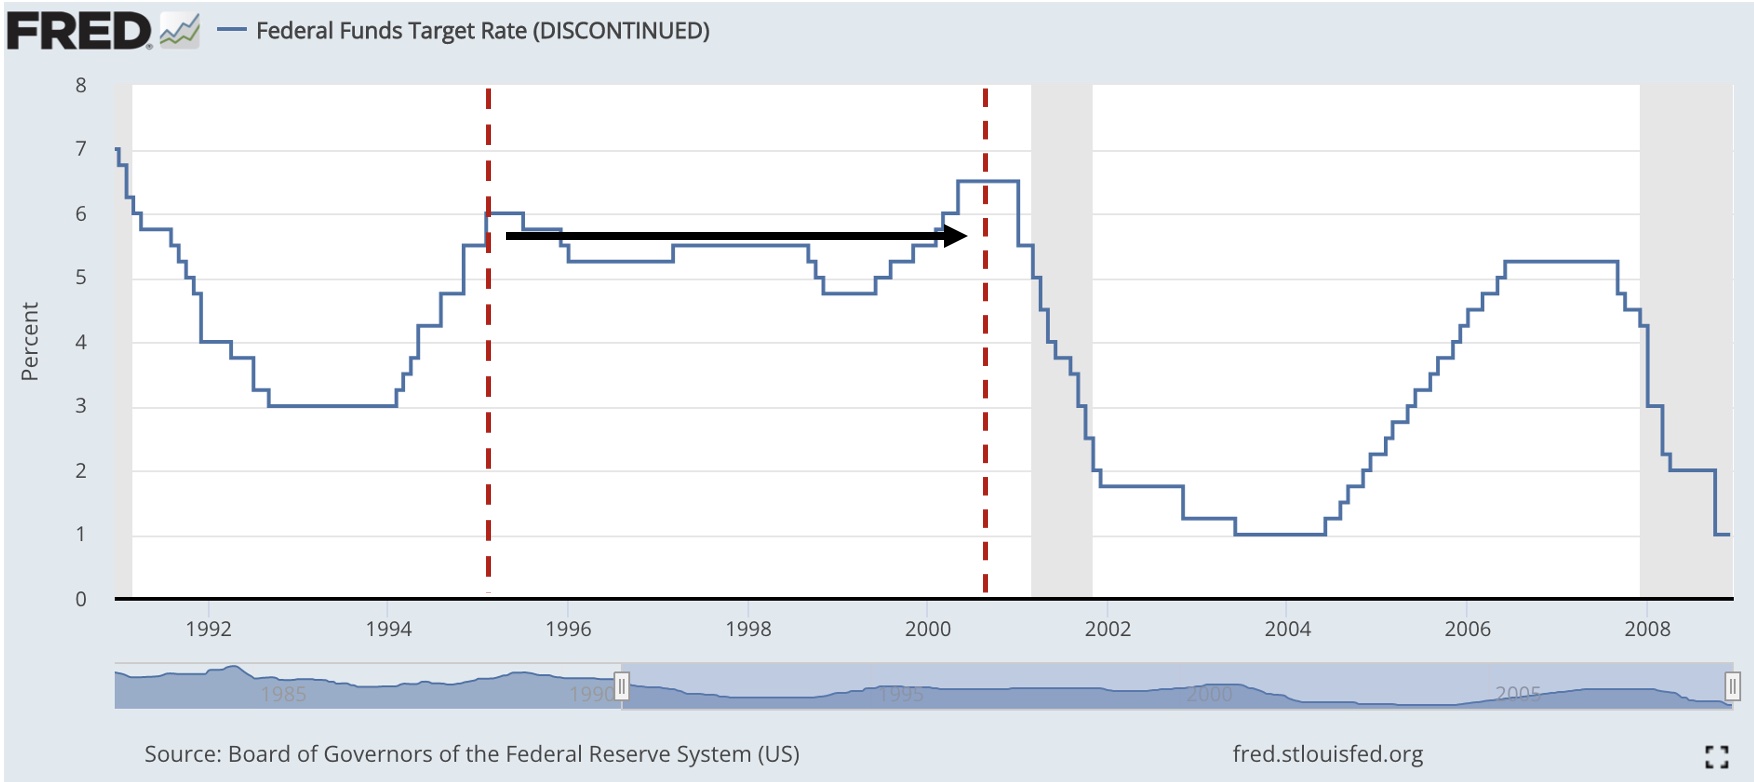 FED FUNDS RATE